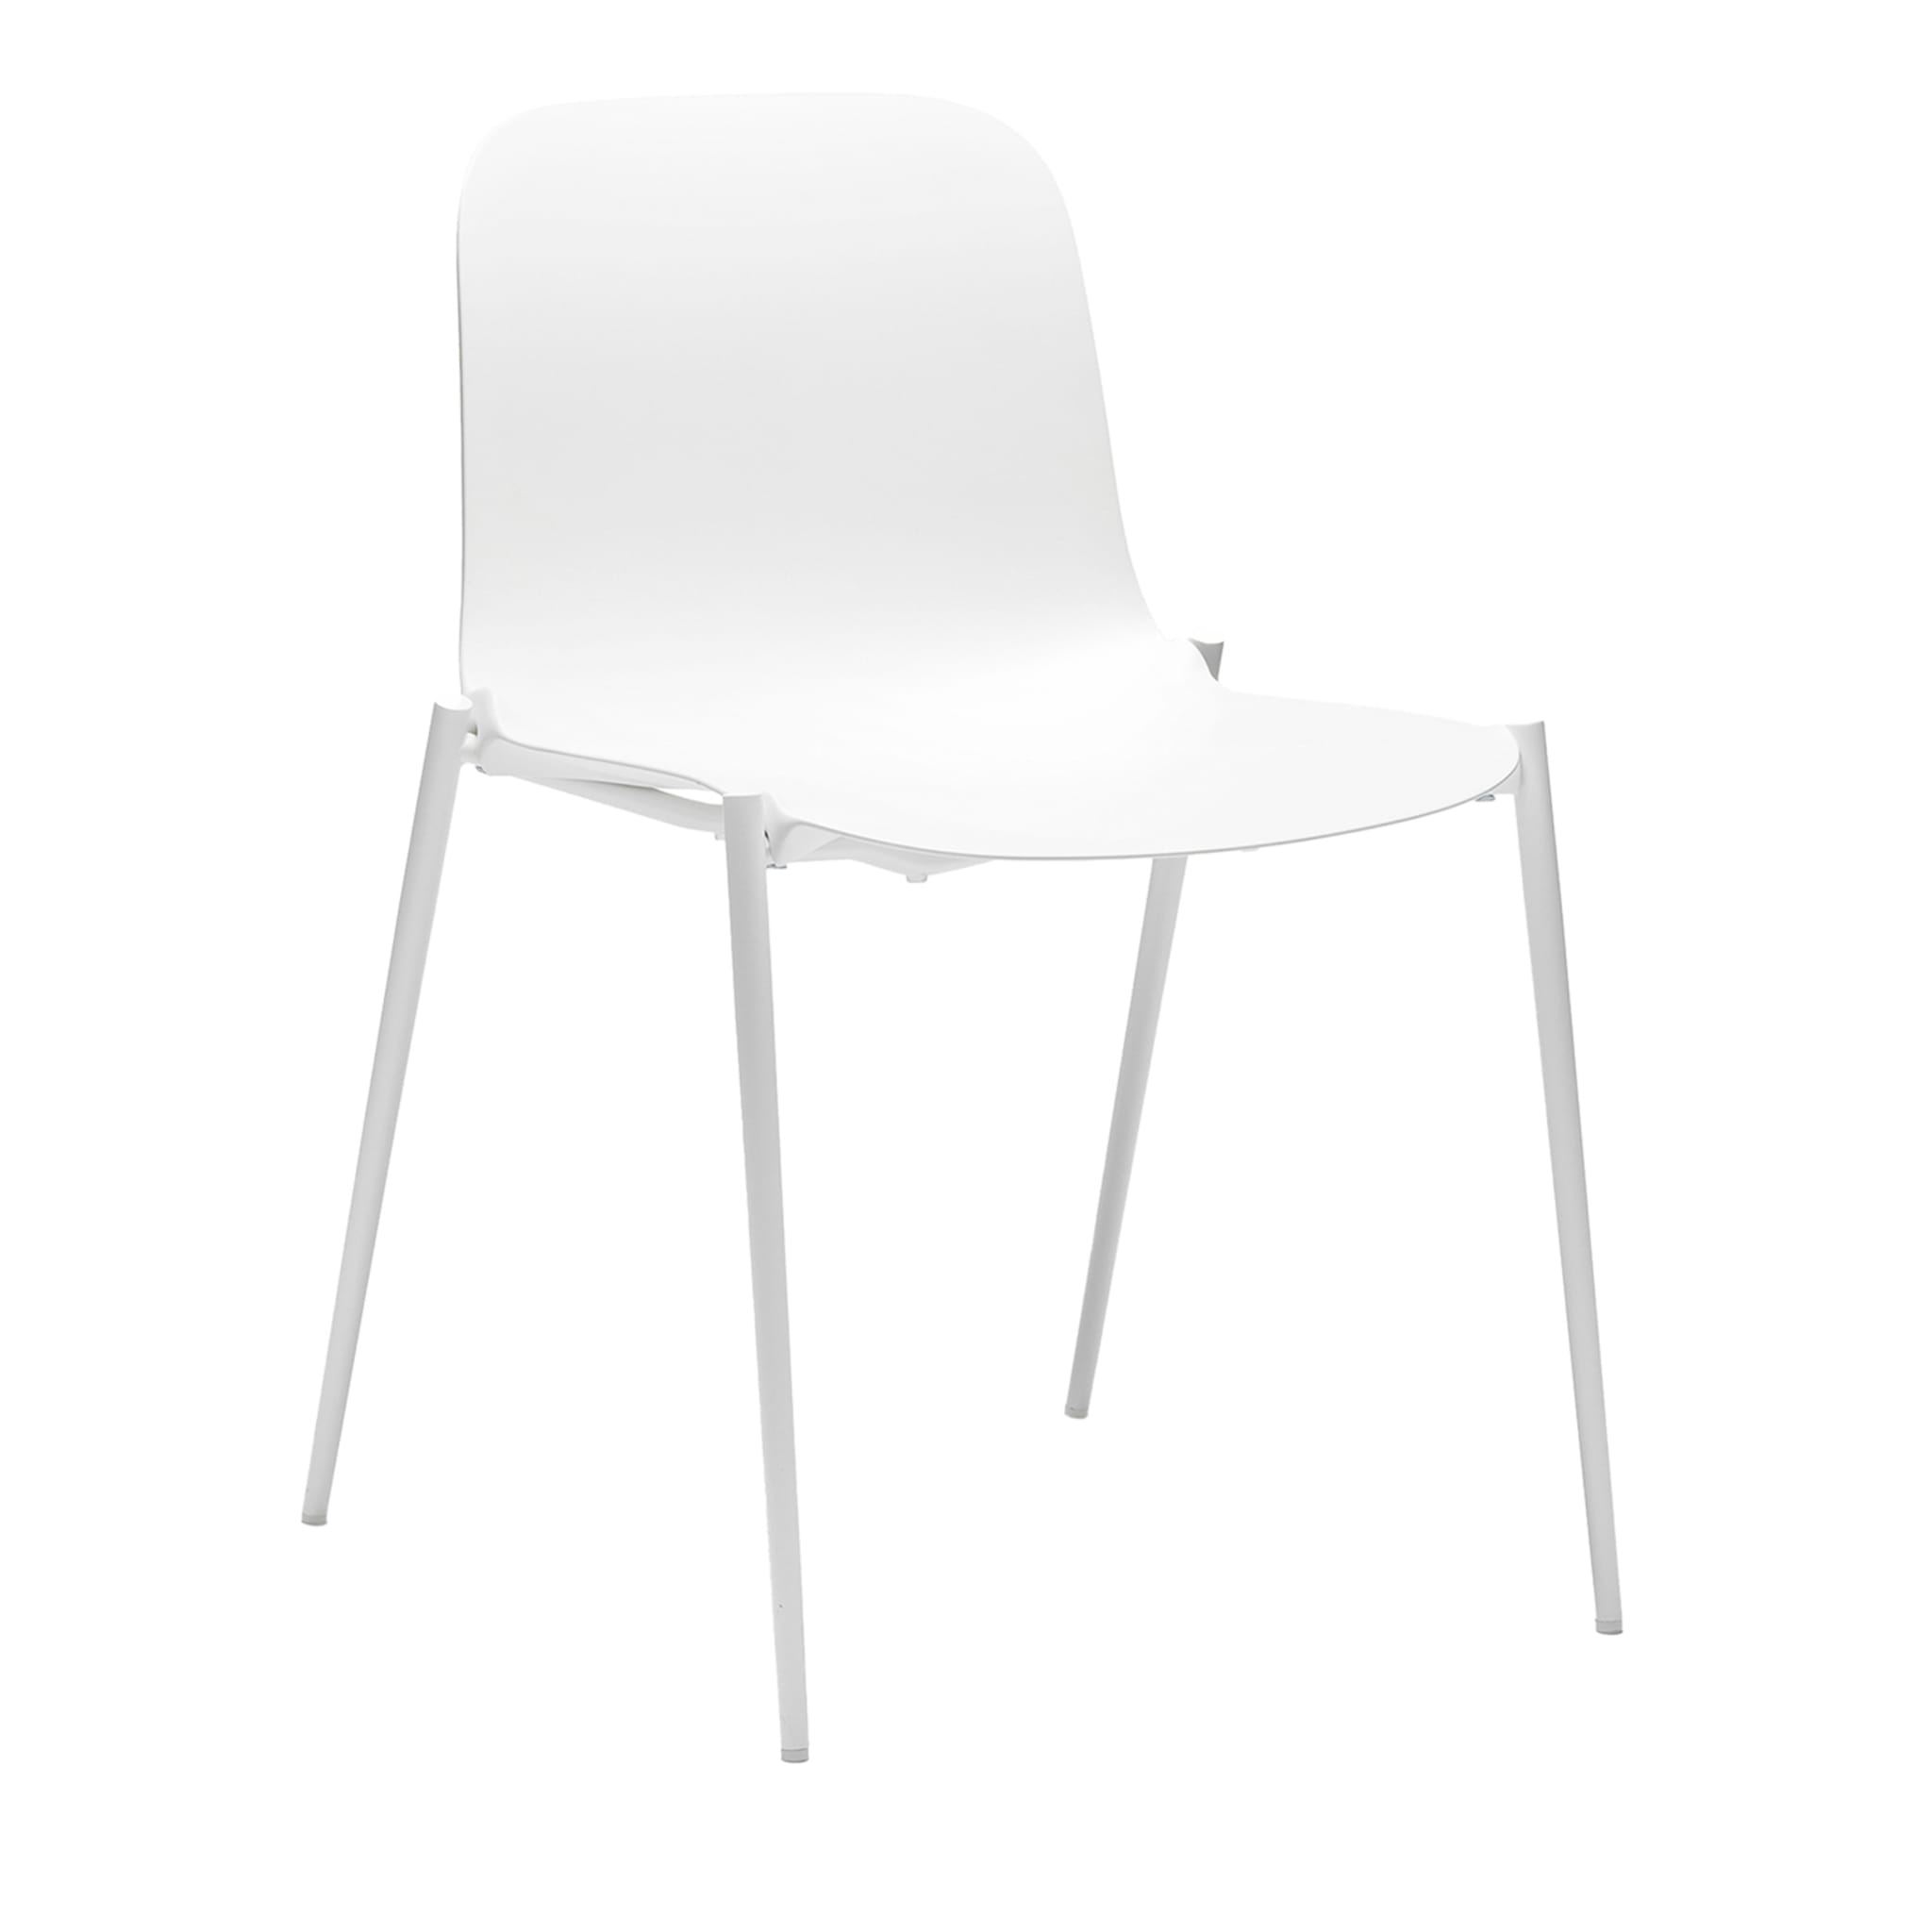 Set of 2 Dogo S White Chair by Roberto Paoli - Main view